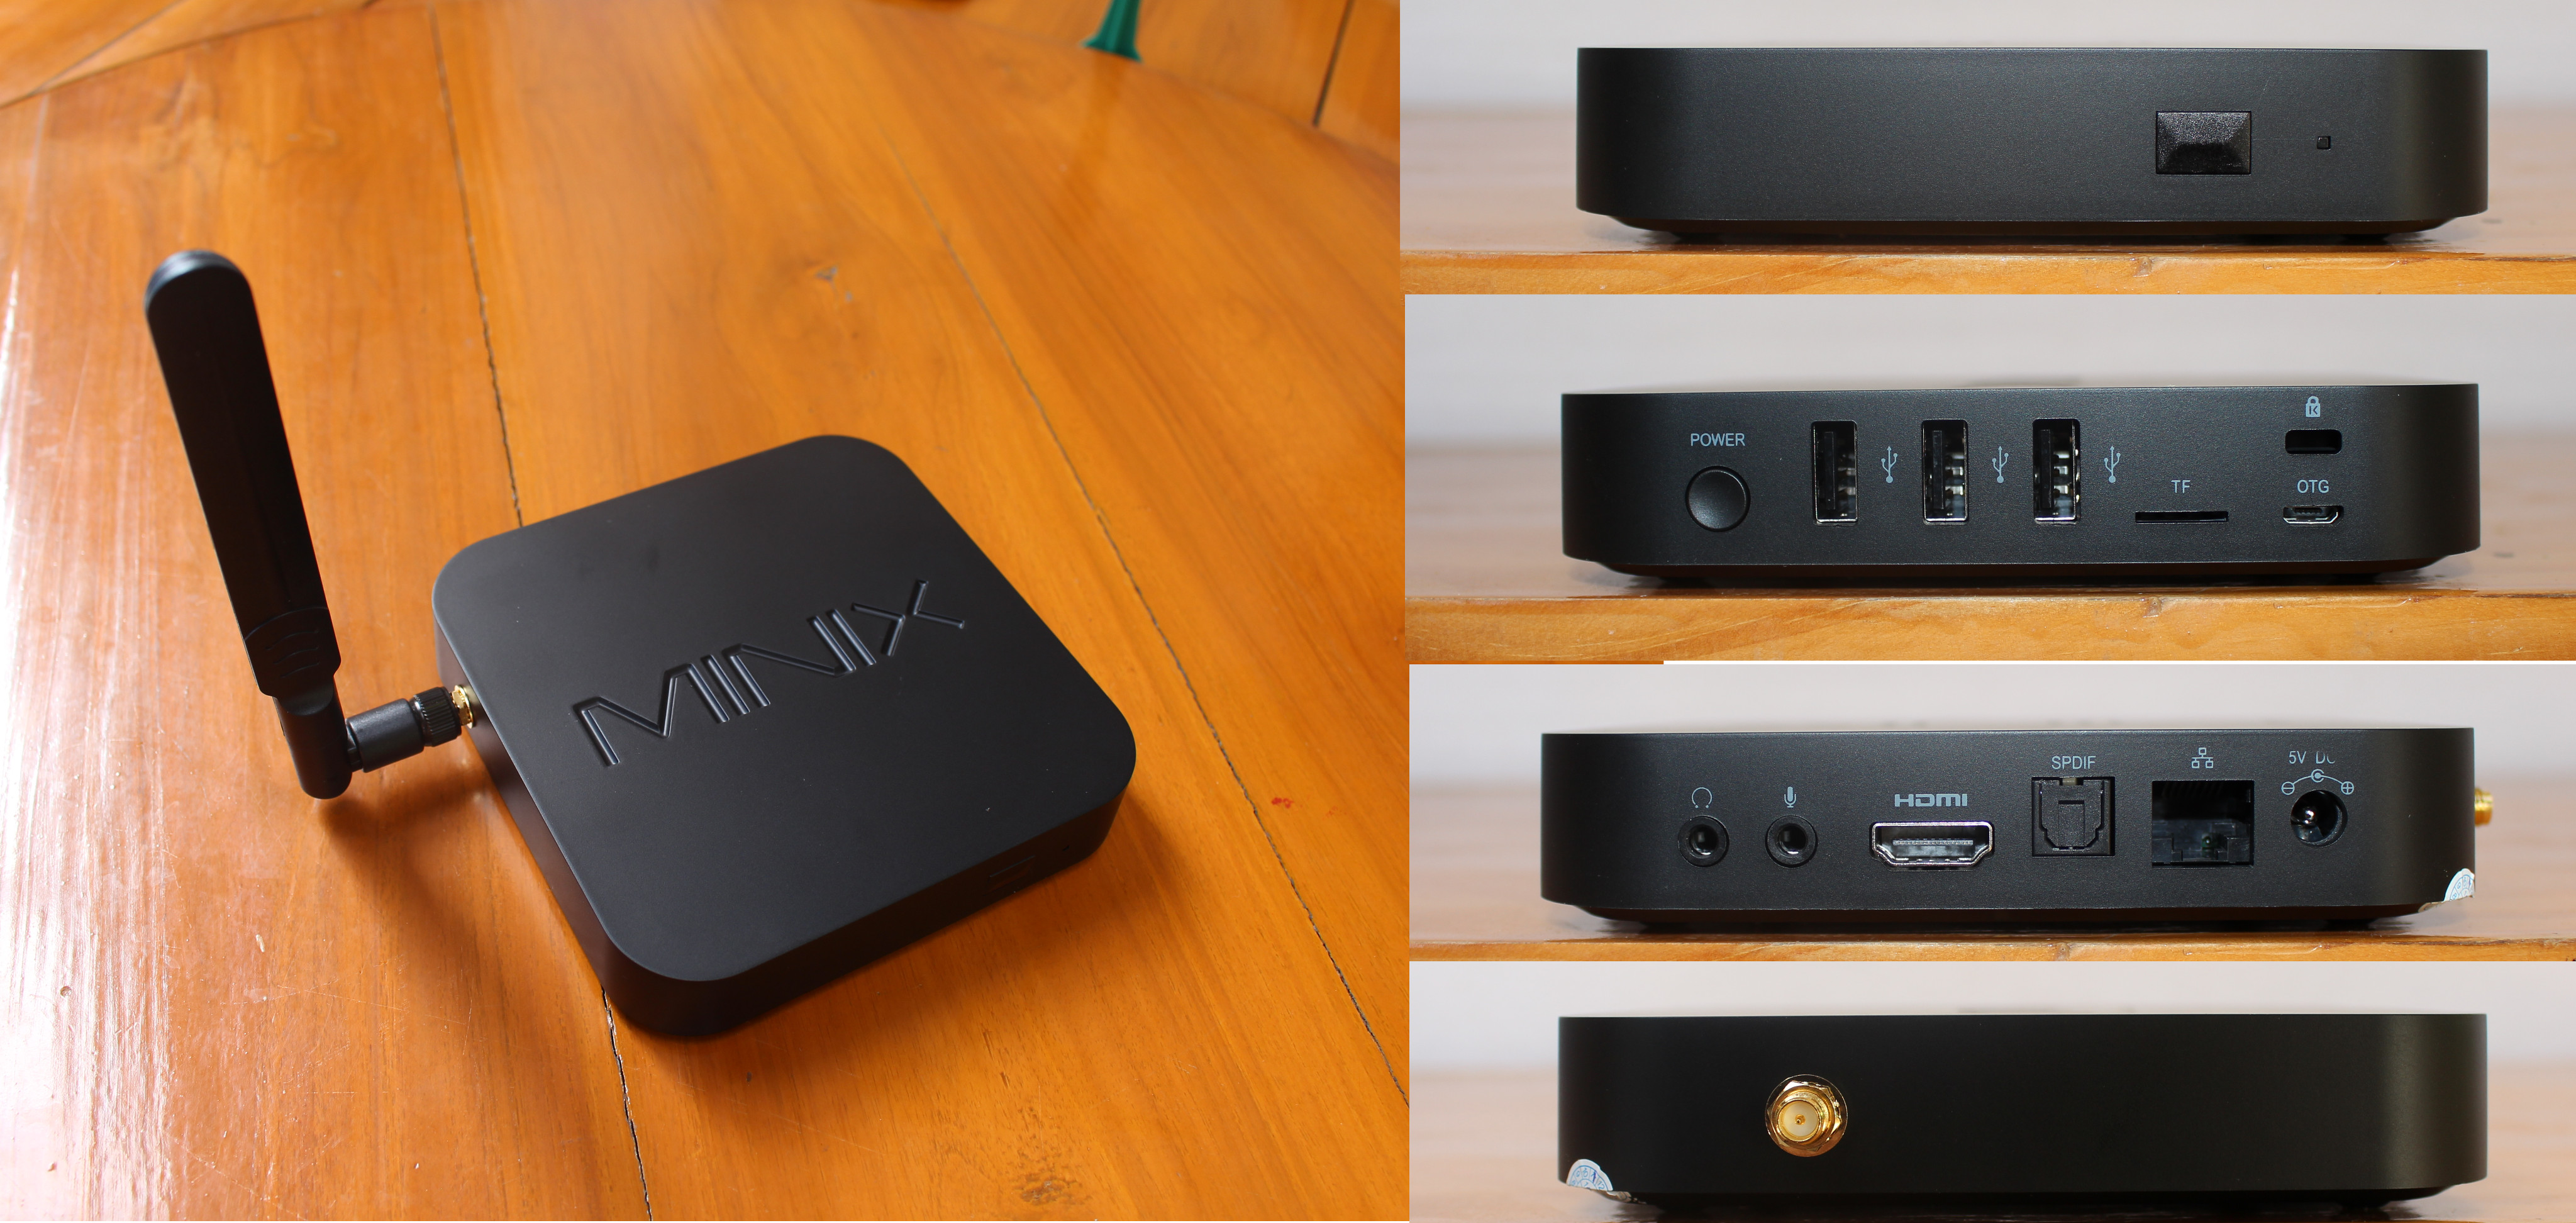 Logisk Kiks Athletic What's the Best Android TV Box? - CNX Software